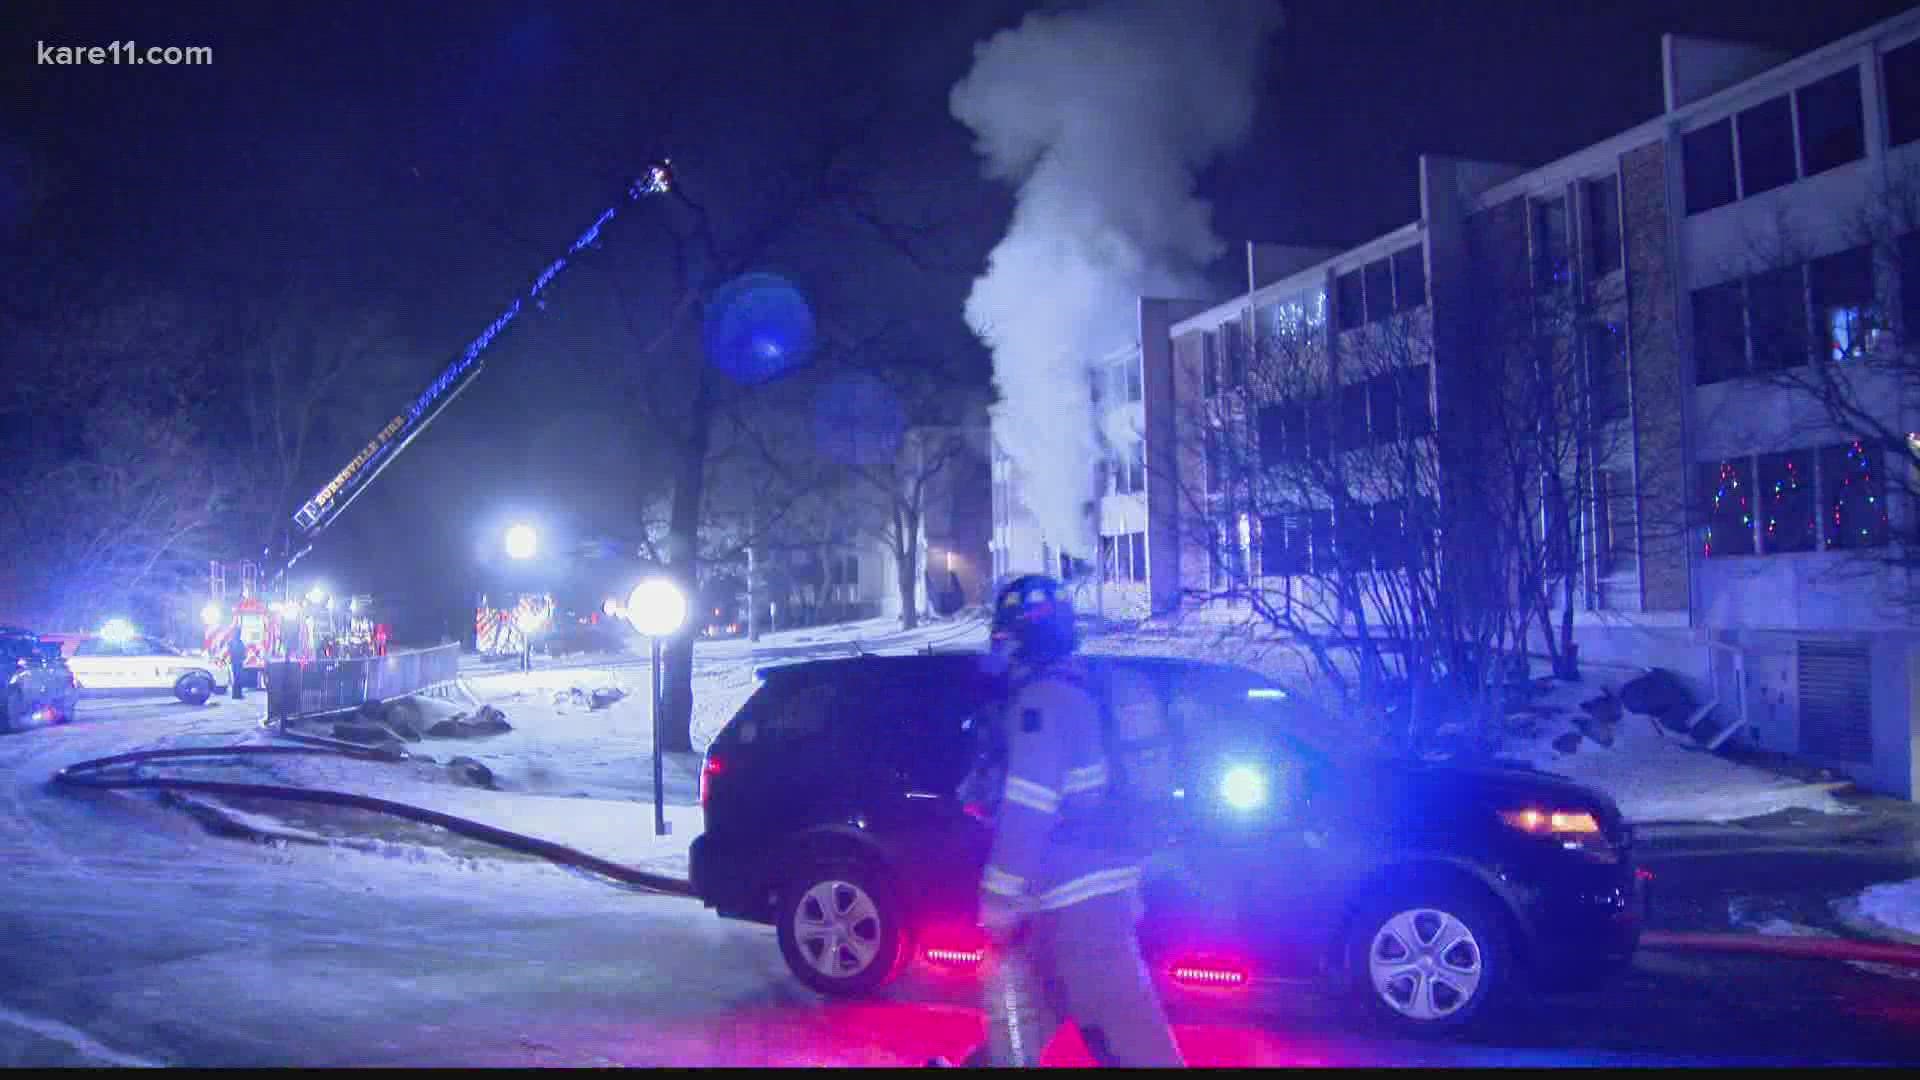 The building fire went to four alarms on Wednesday night.